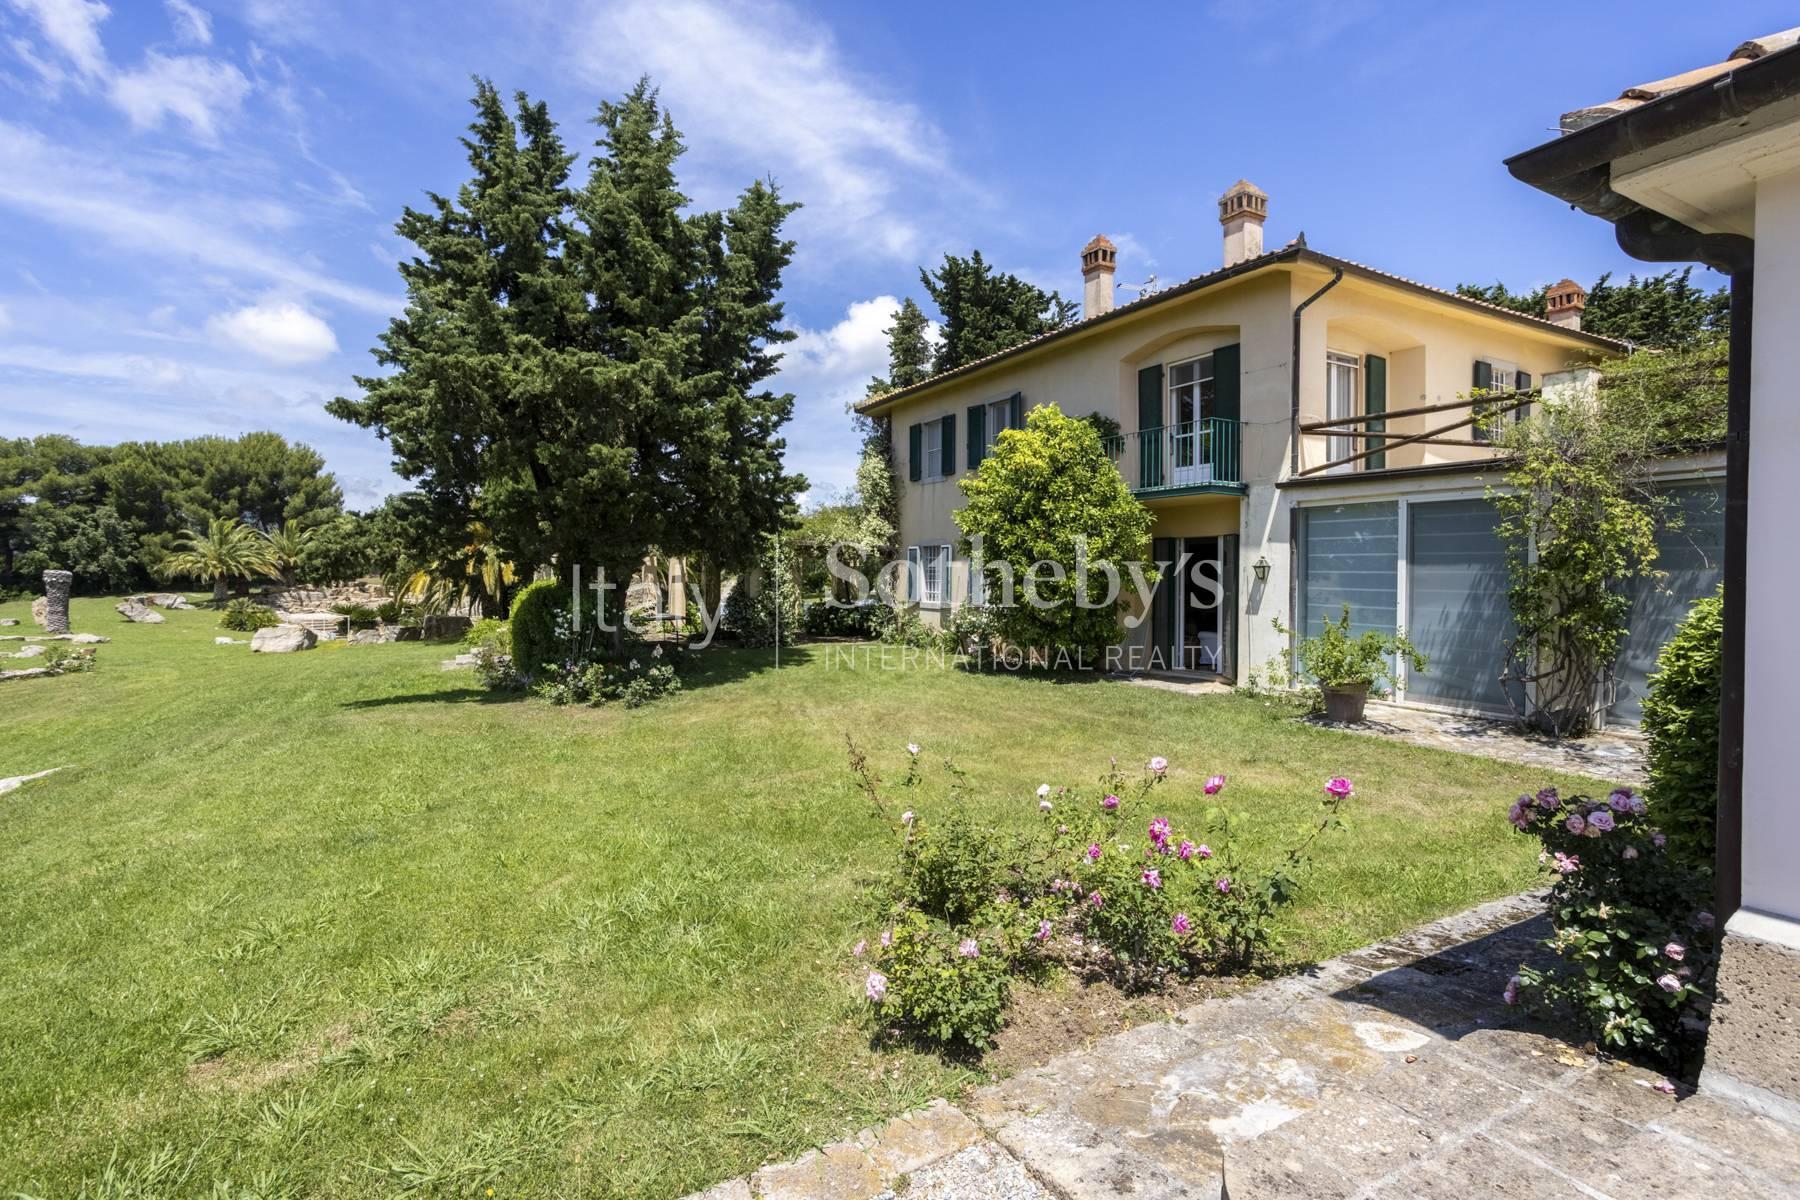 Charming country house with Spa and Pool near Capalbio - 4